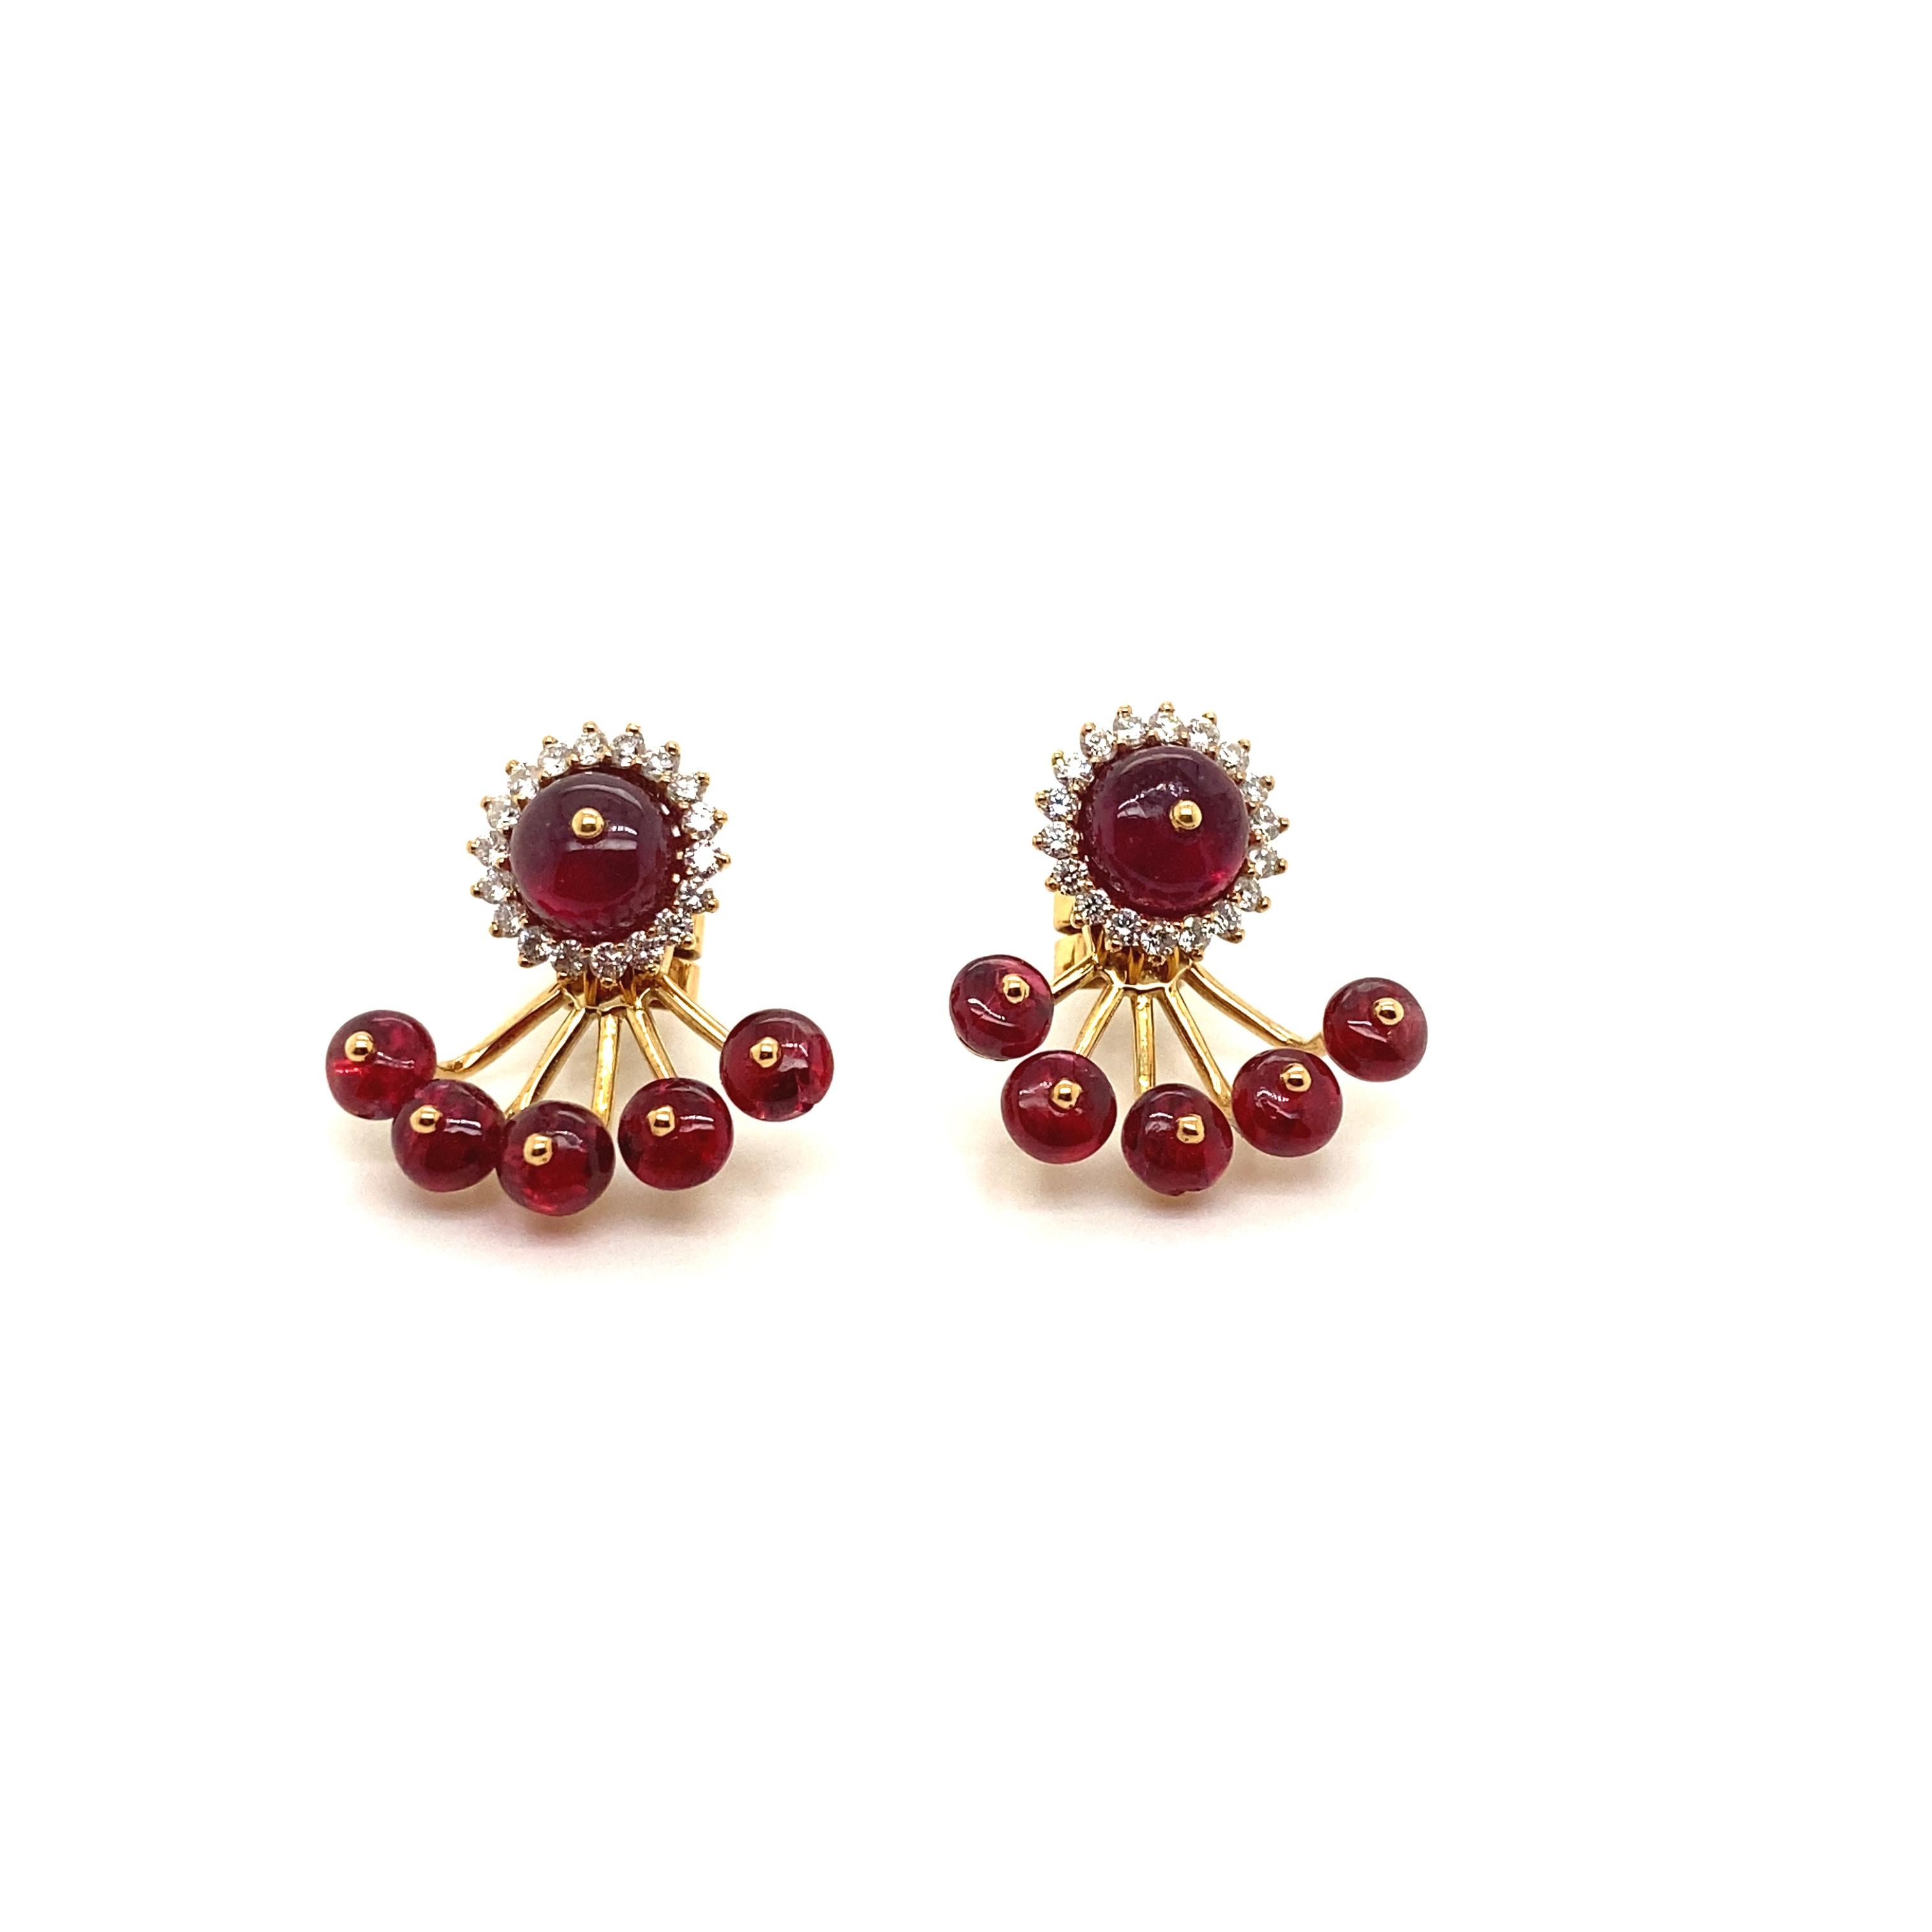 Modern 12.98 Carat Natural Red Spinel Beads and Diamond Gold Earrings For Sale